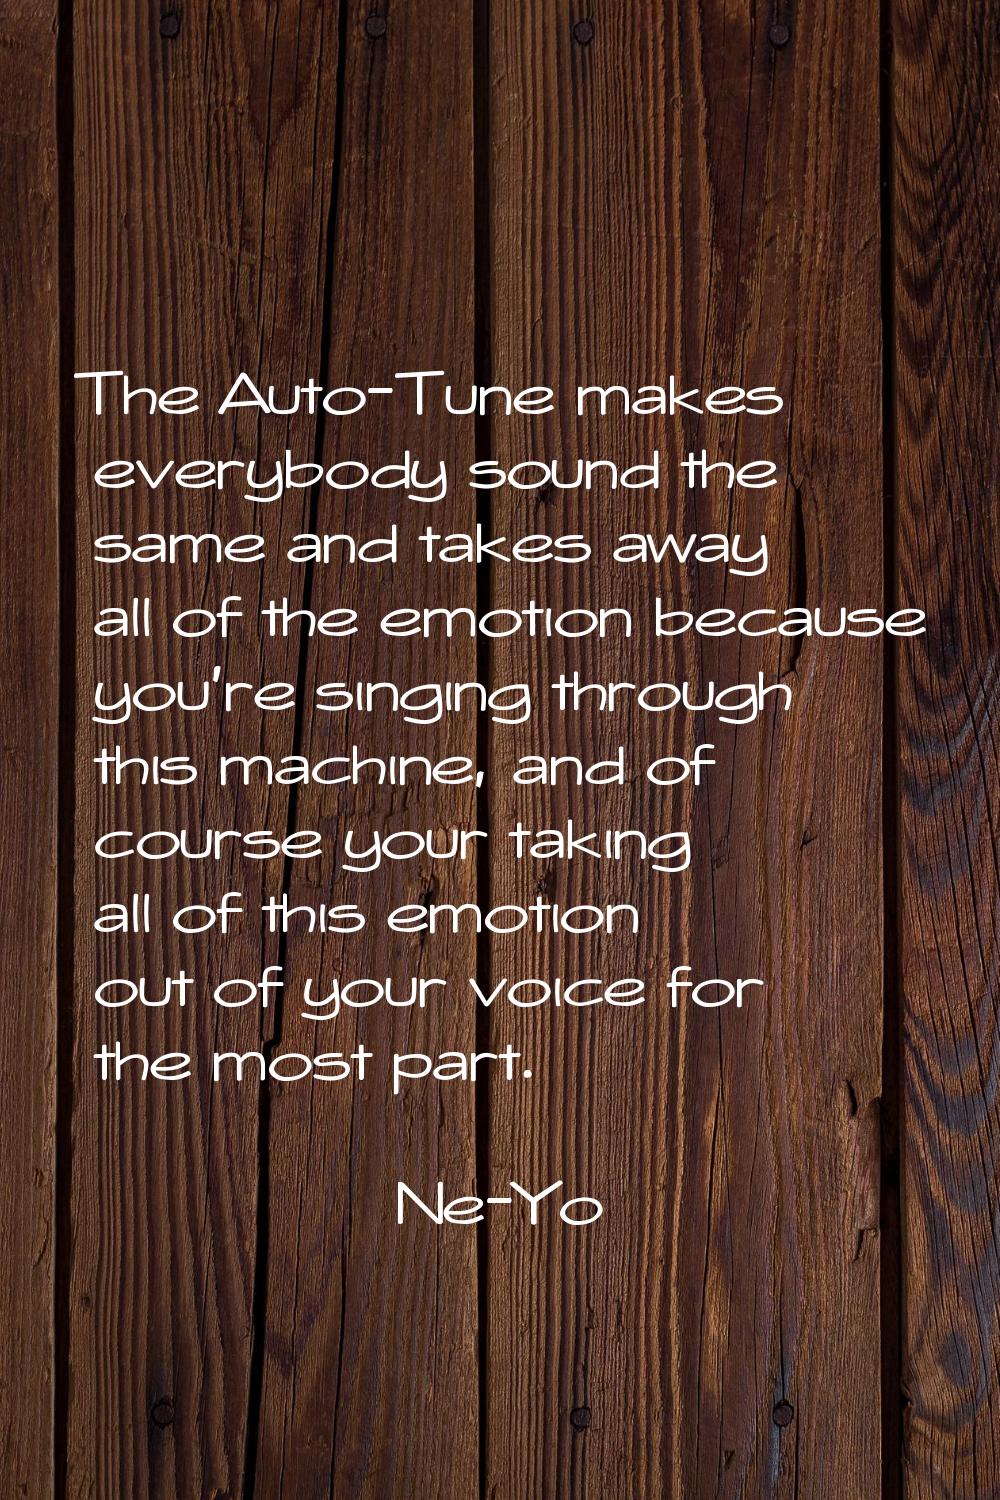 The Auto-Tune makes everybody sound the same and takes away all of the emotion because you're singi